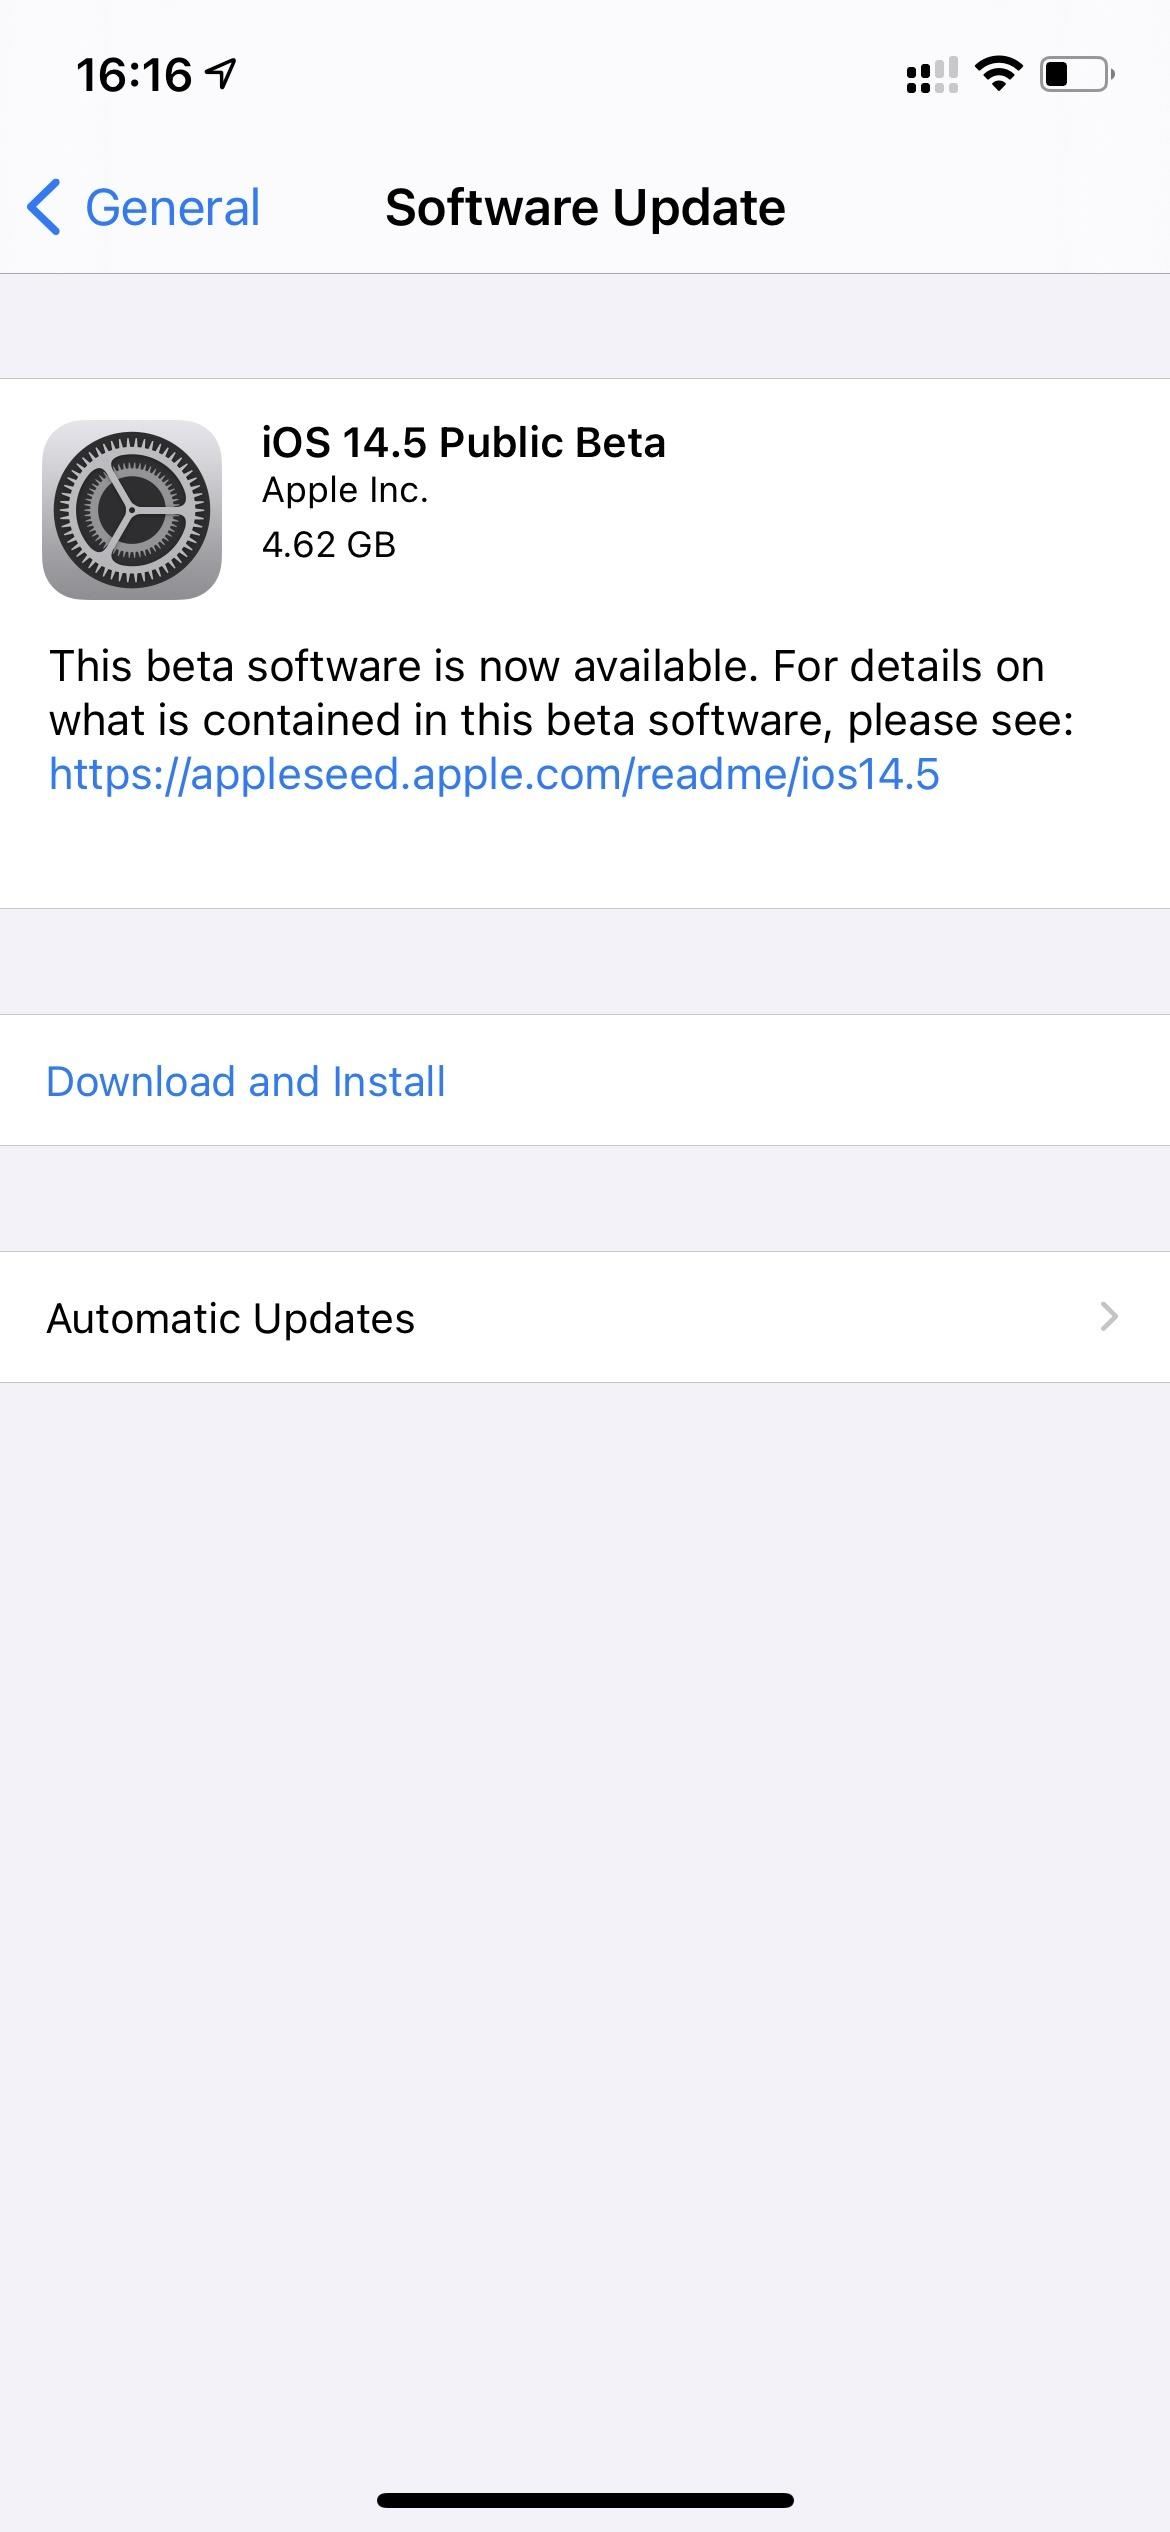 Apple Releases iOS 14.5 Public Beta 1 for iPhone, Adds Support for Xbox Series X & PS5 DualSense Controllers